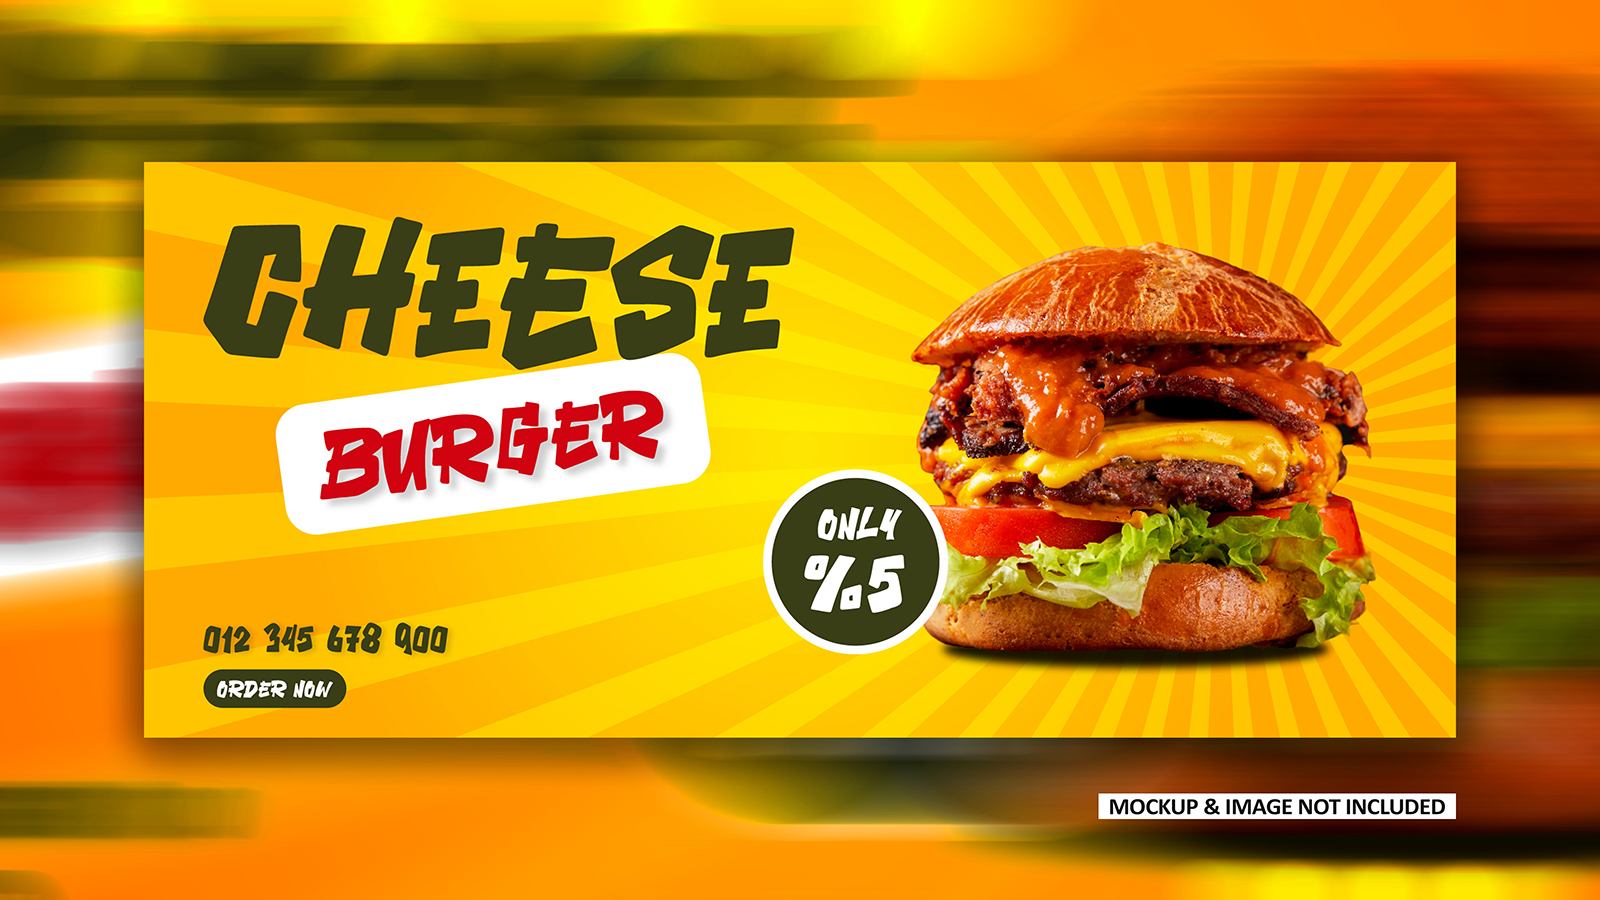 Cheese Burger Fast food Social media ad cover banner design EPS template